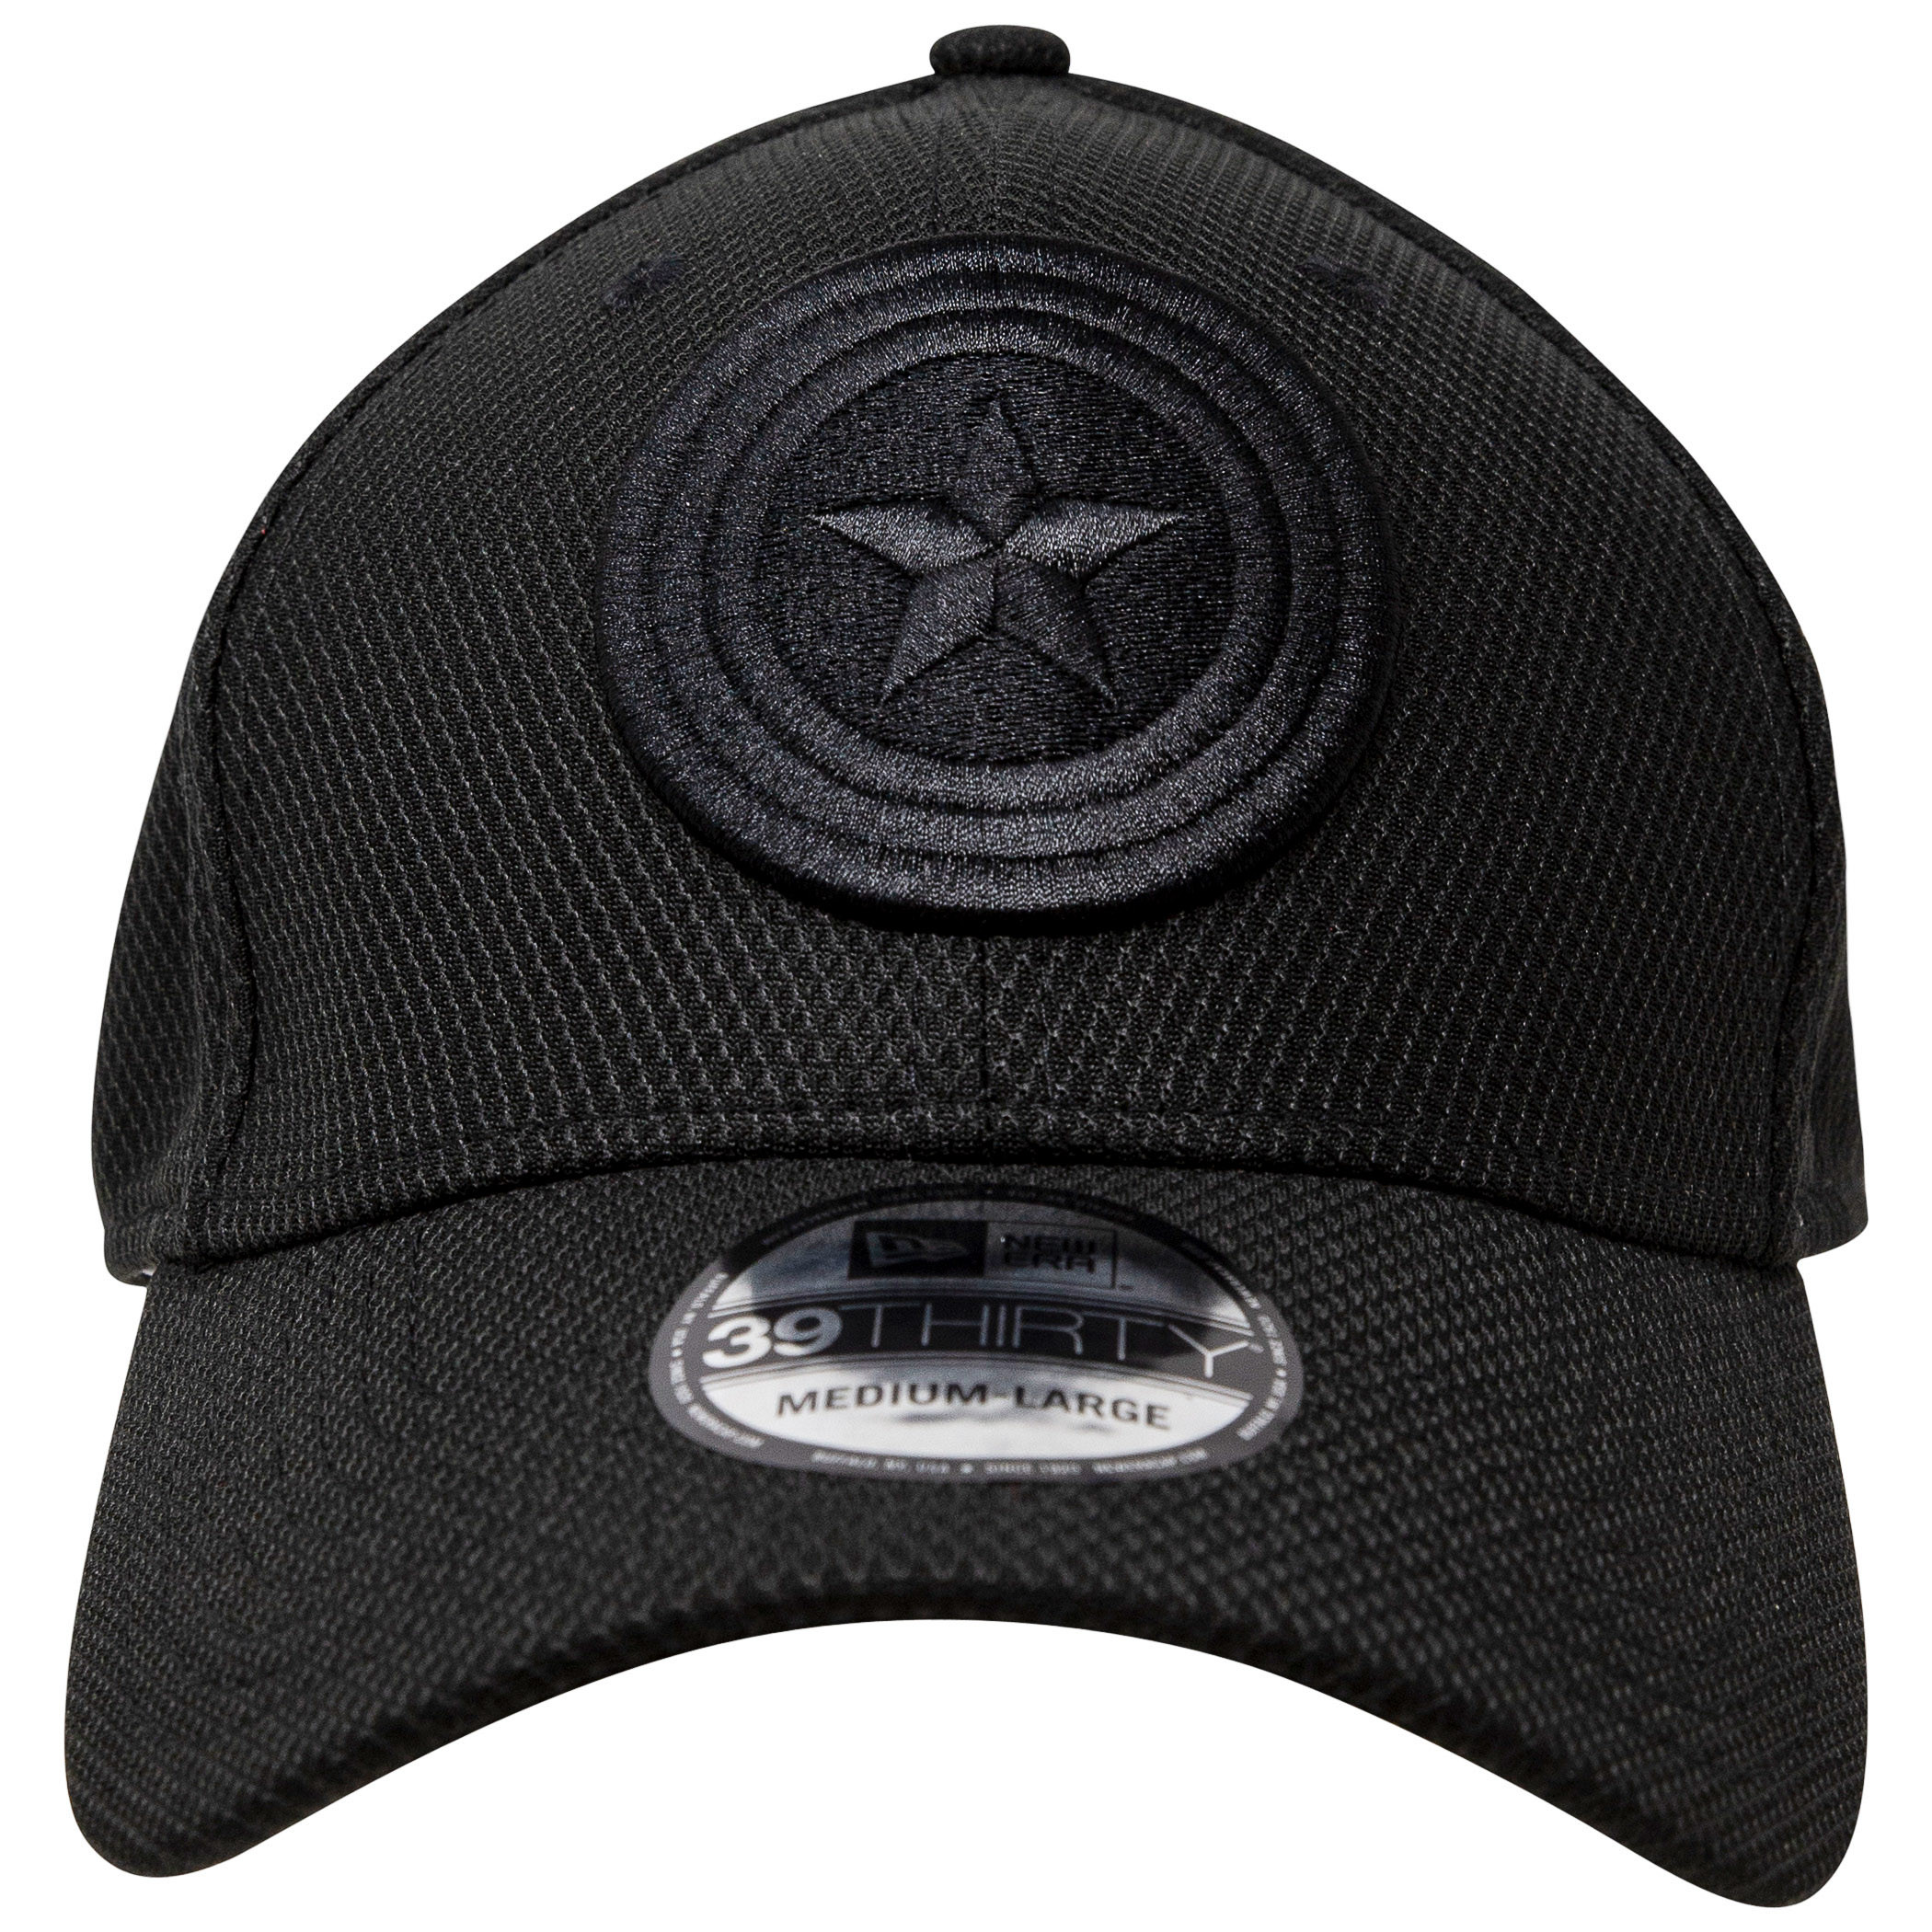 Long Live Captain America MCU Memorial New Era 39Thirty Flex Fitted Hat